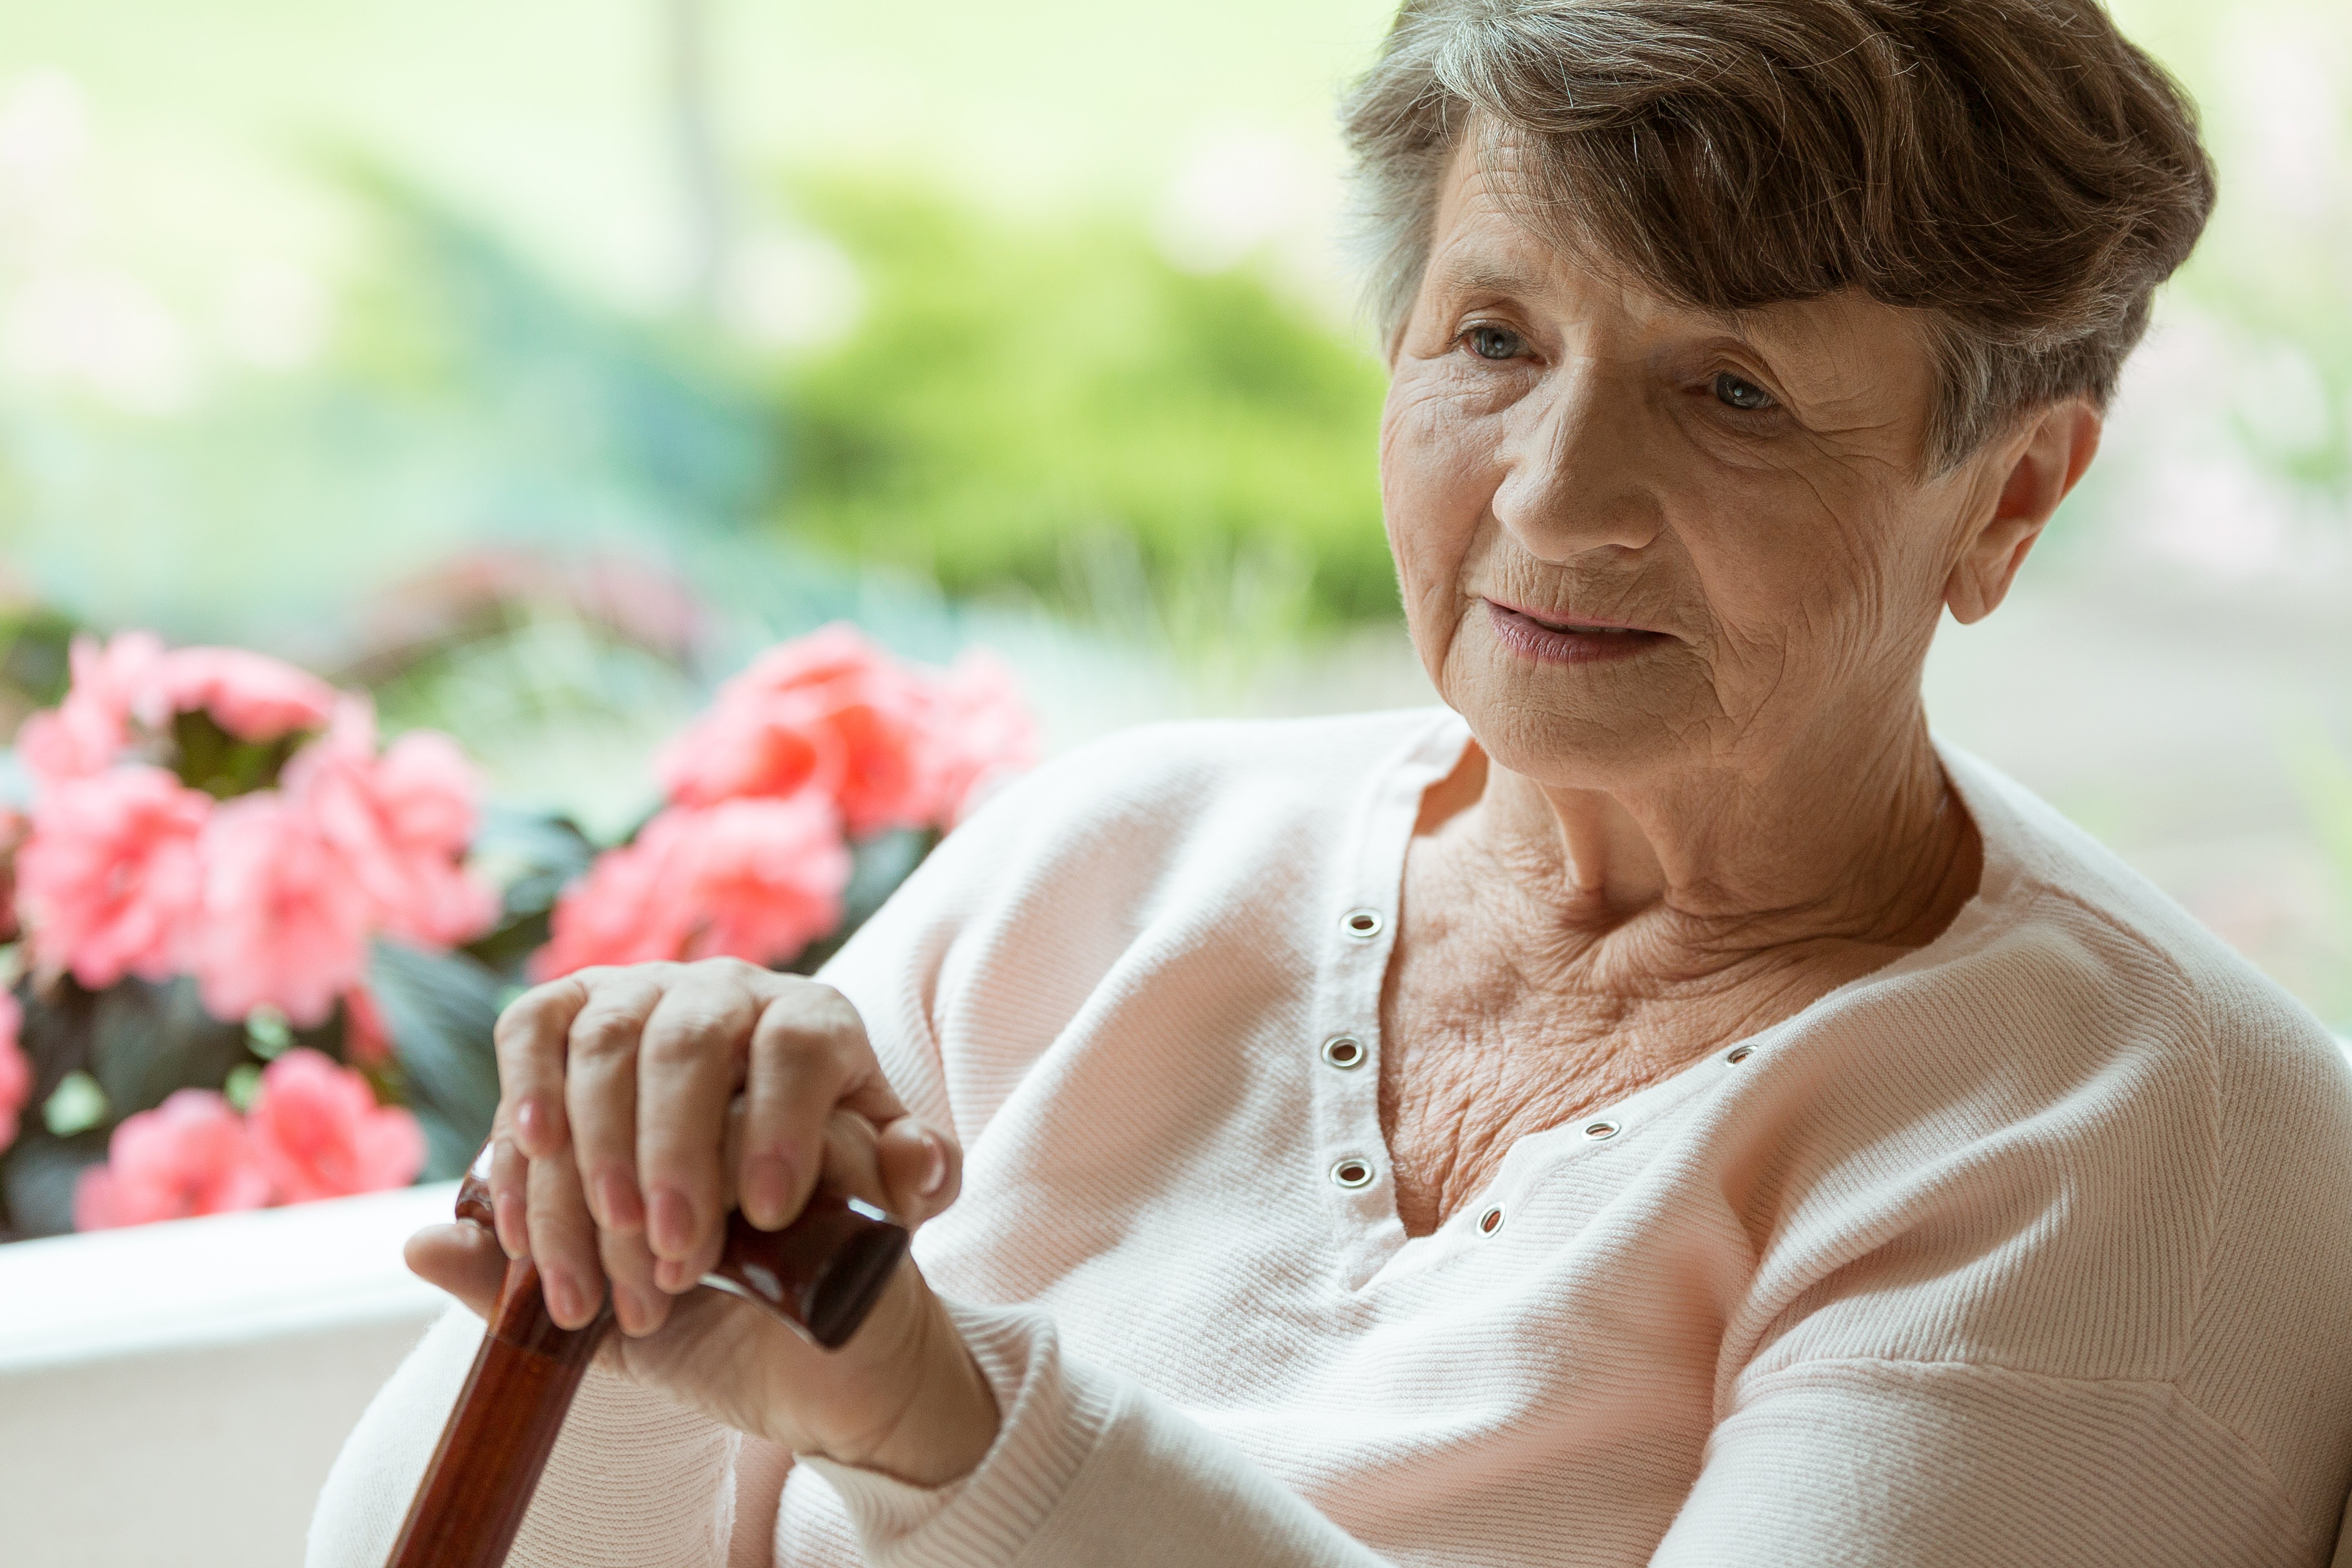 Elder woman sitting on white sofa with walking cane in room with pink flowers | Photo: Shutterstock.com